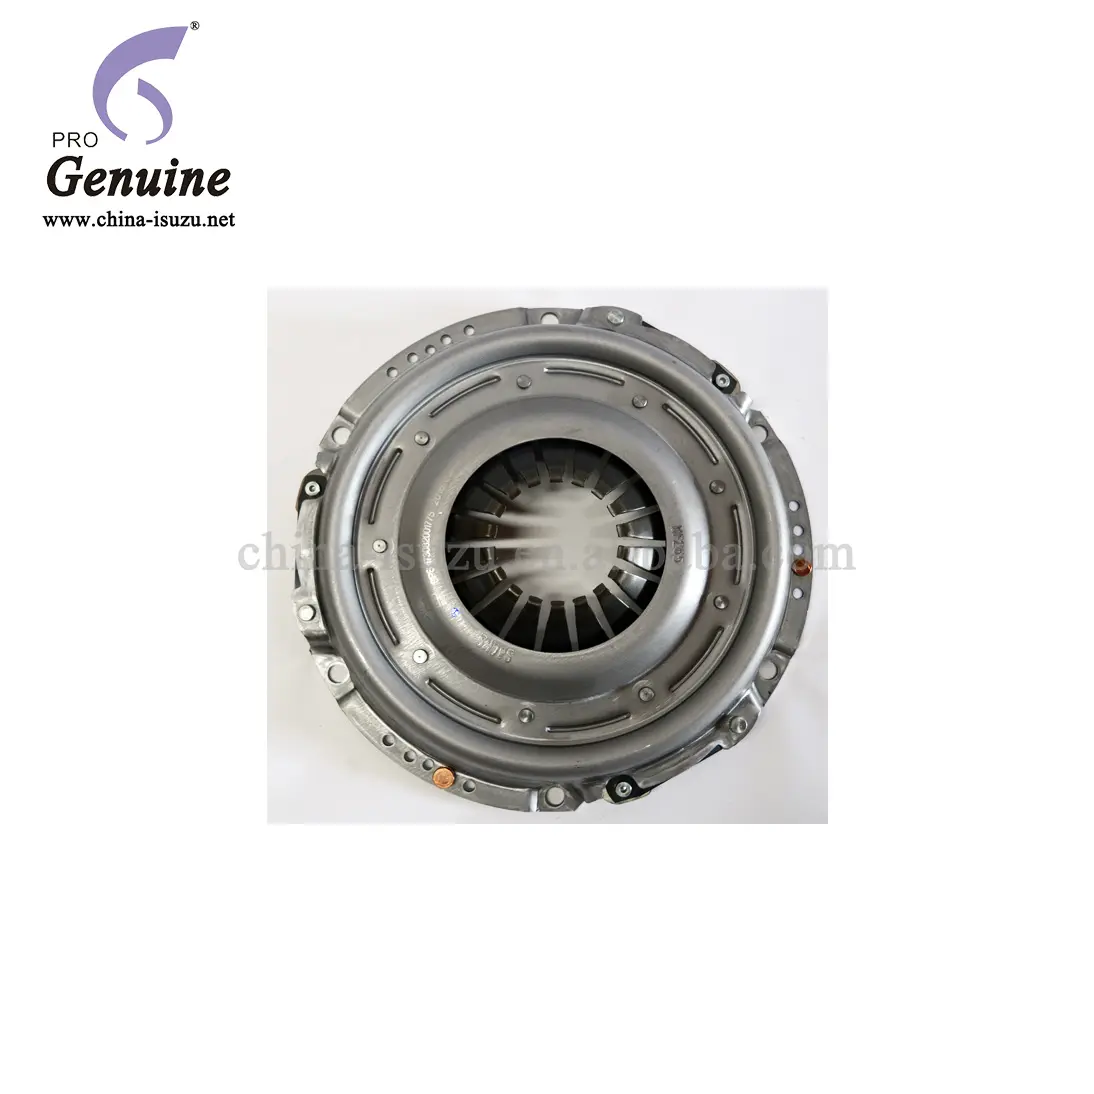 China truck JMC 1030 engine auto parts clutch pressure plate clutch cover SIZE 265MM 160110014-JL for JMC carrying euro 3